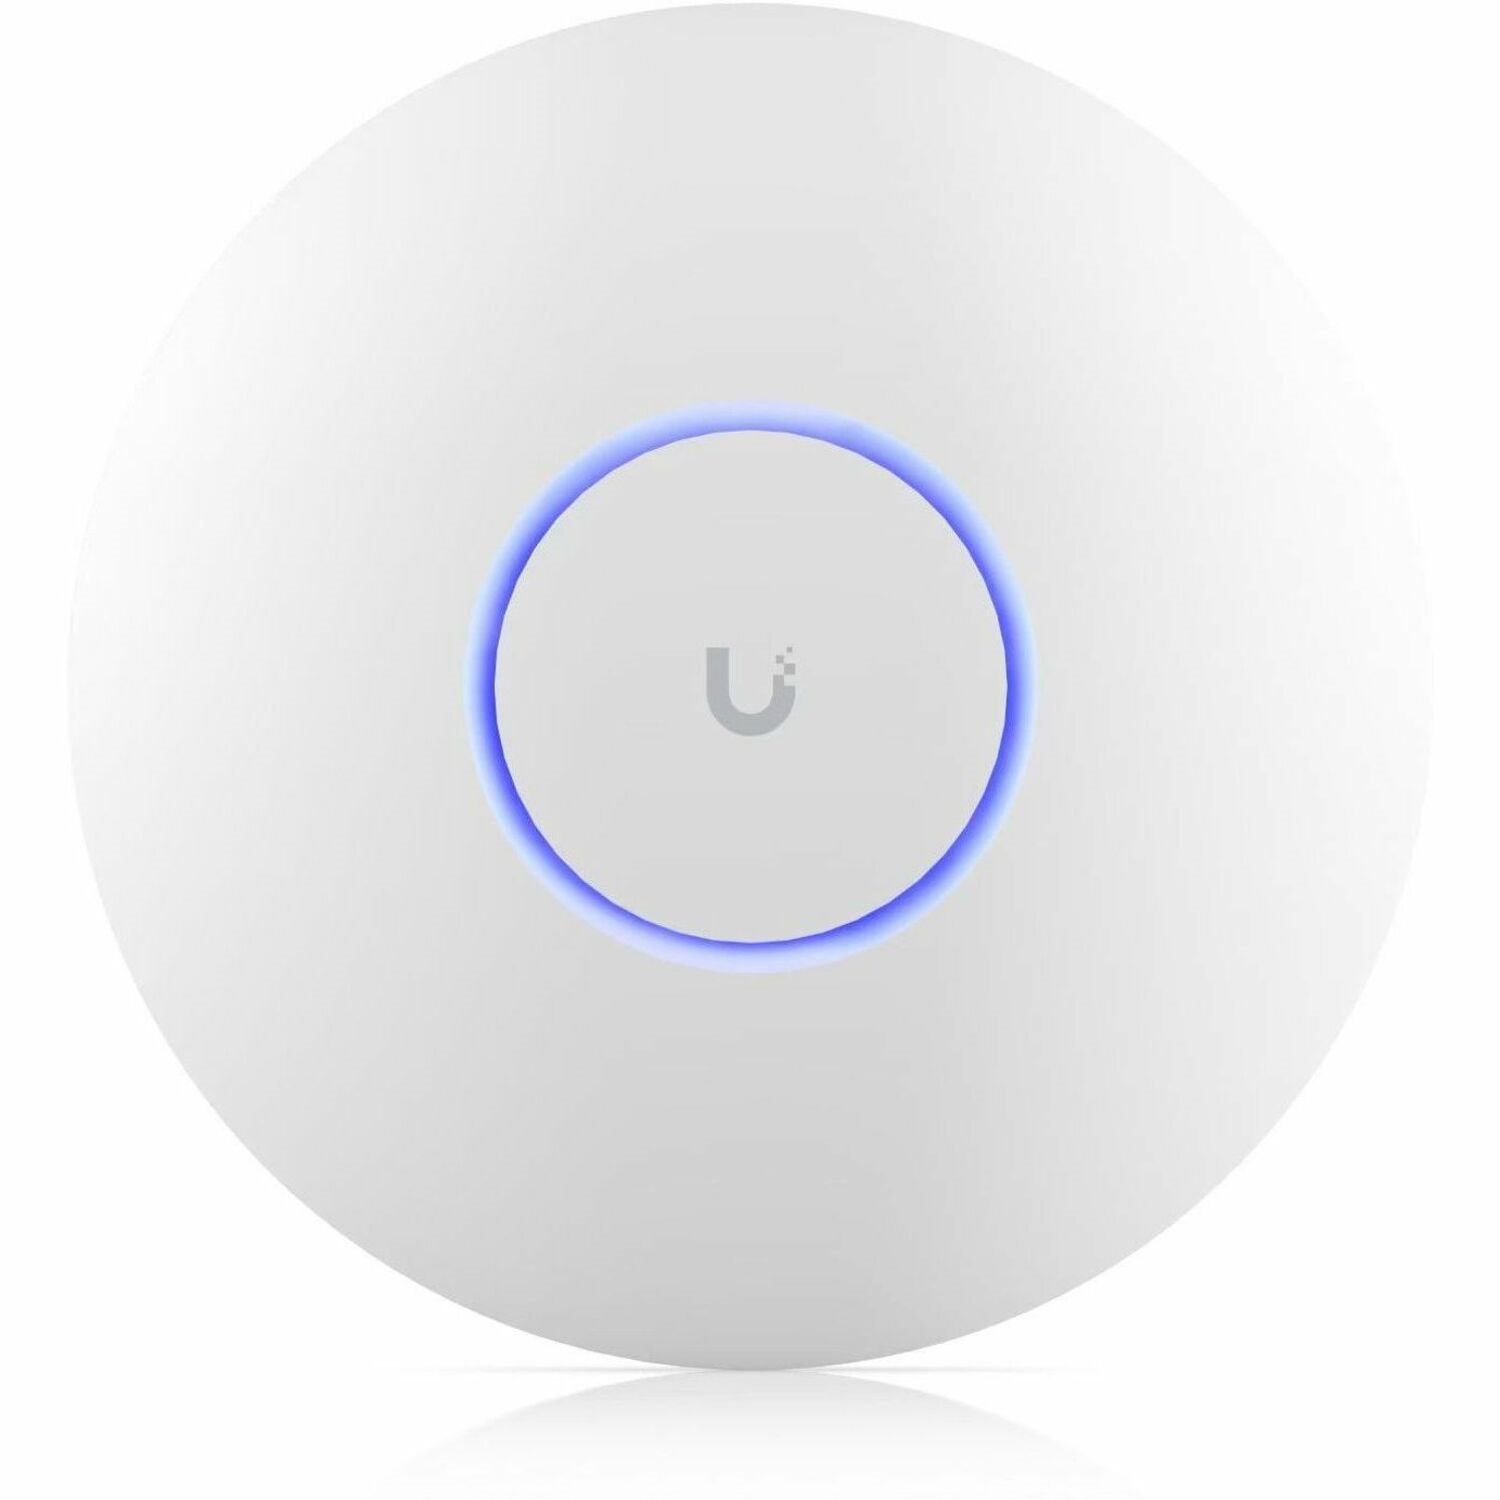 Ubiquiti U7 Pro Tri Band IEEE 802.11 a/b/g/n/ac/ax/be 9.30 Gbit/s Wireless Access Point